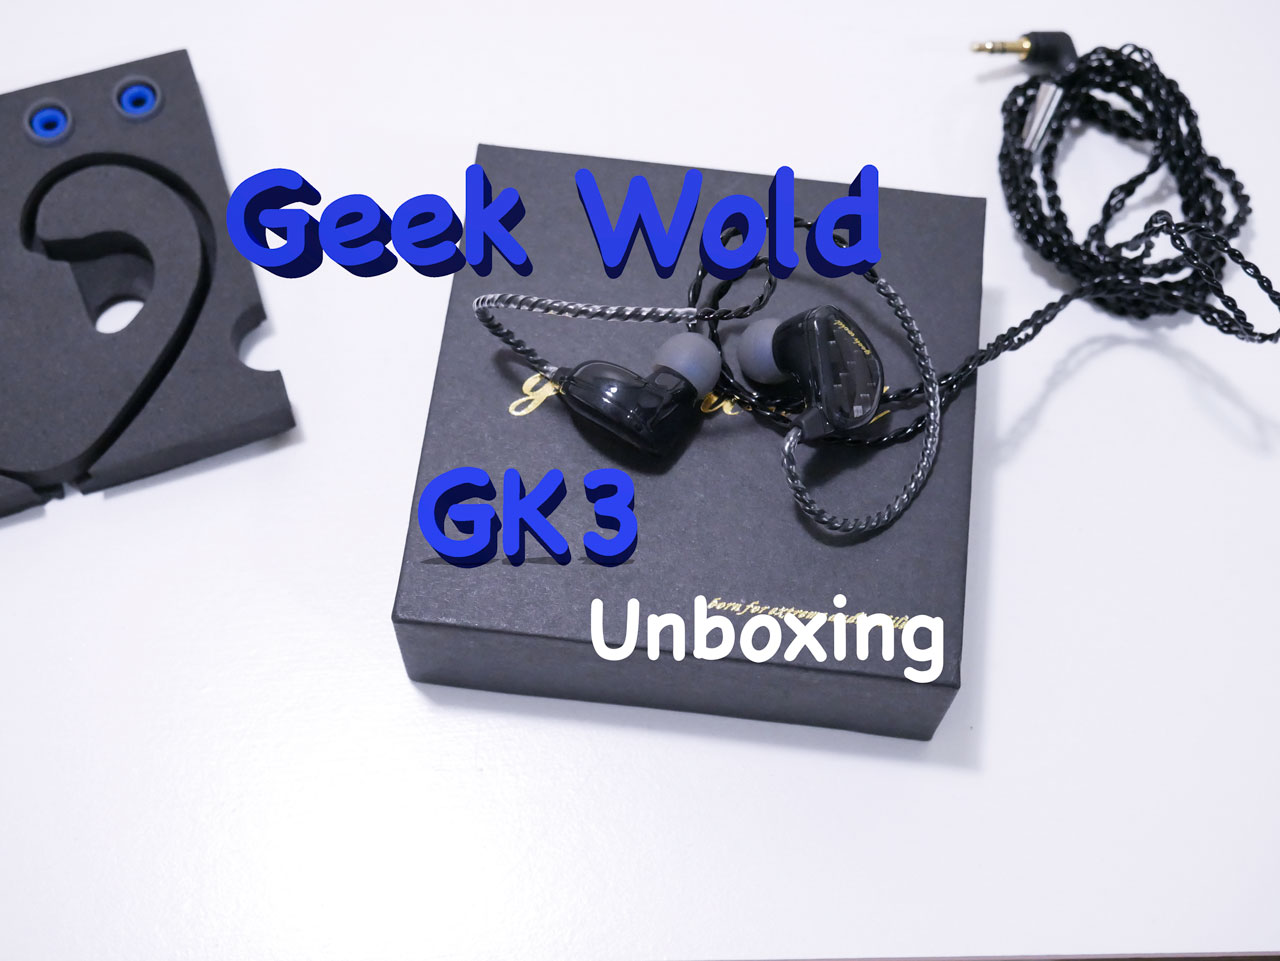 Geek Wold GK3 | Unboxing